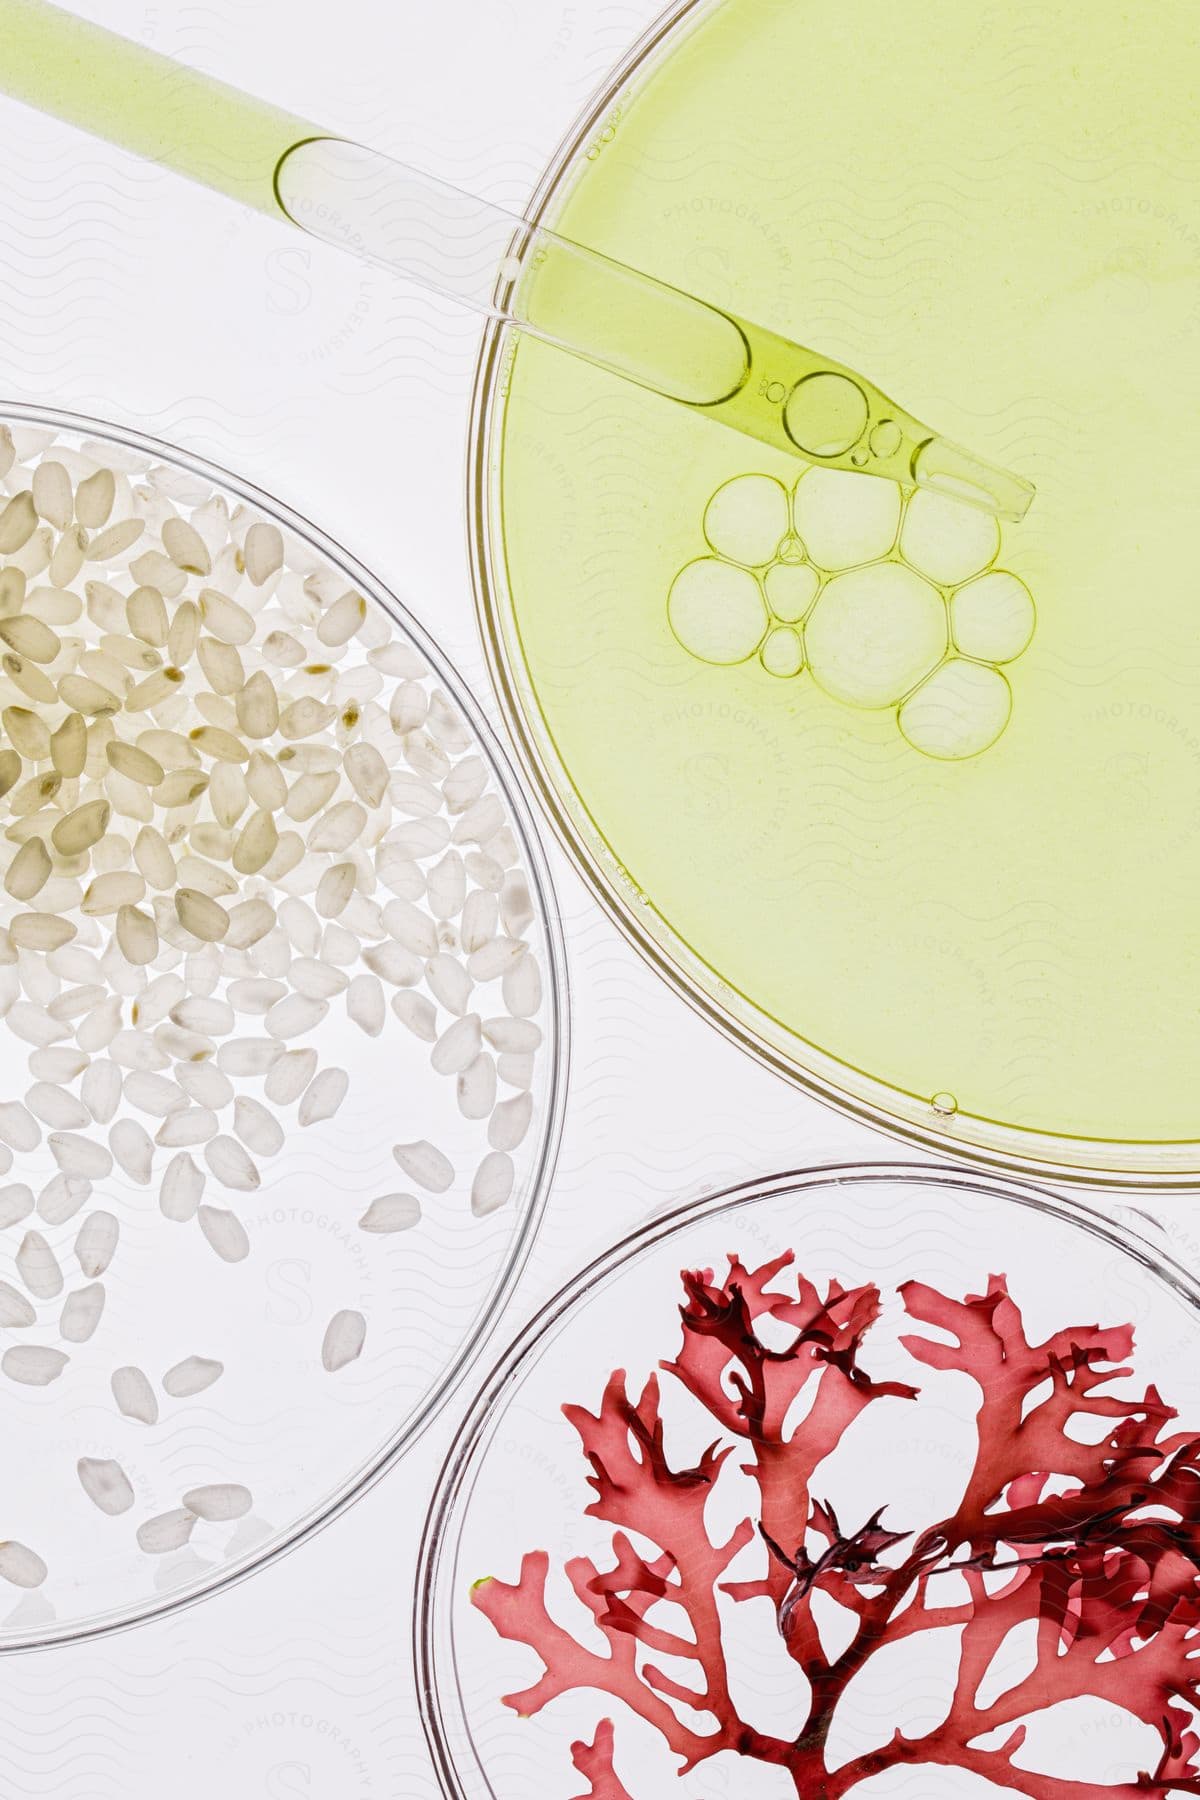 rice grains, red algae and a light green liquid in three petri dishes and a dropper.